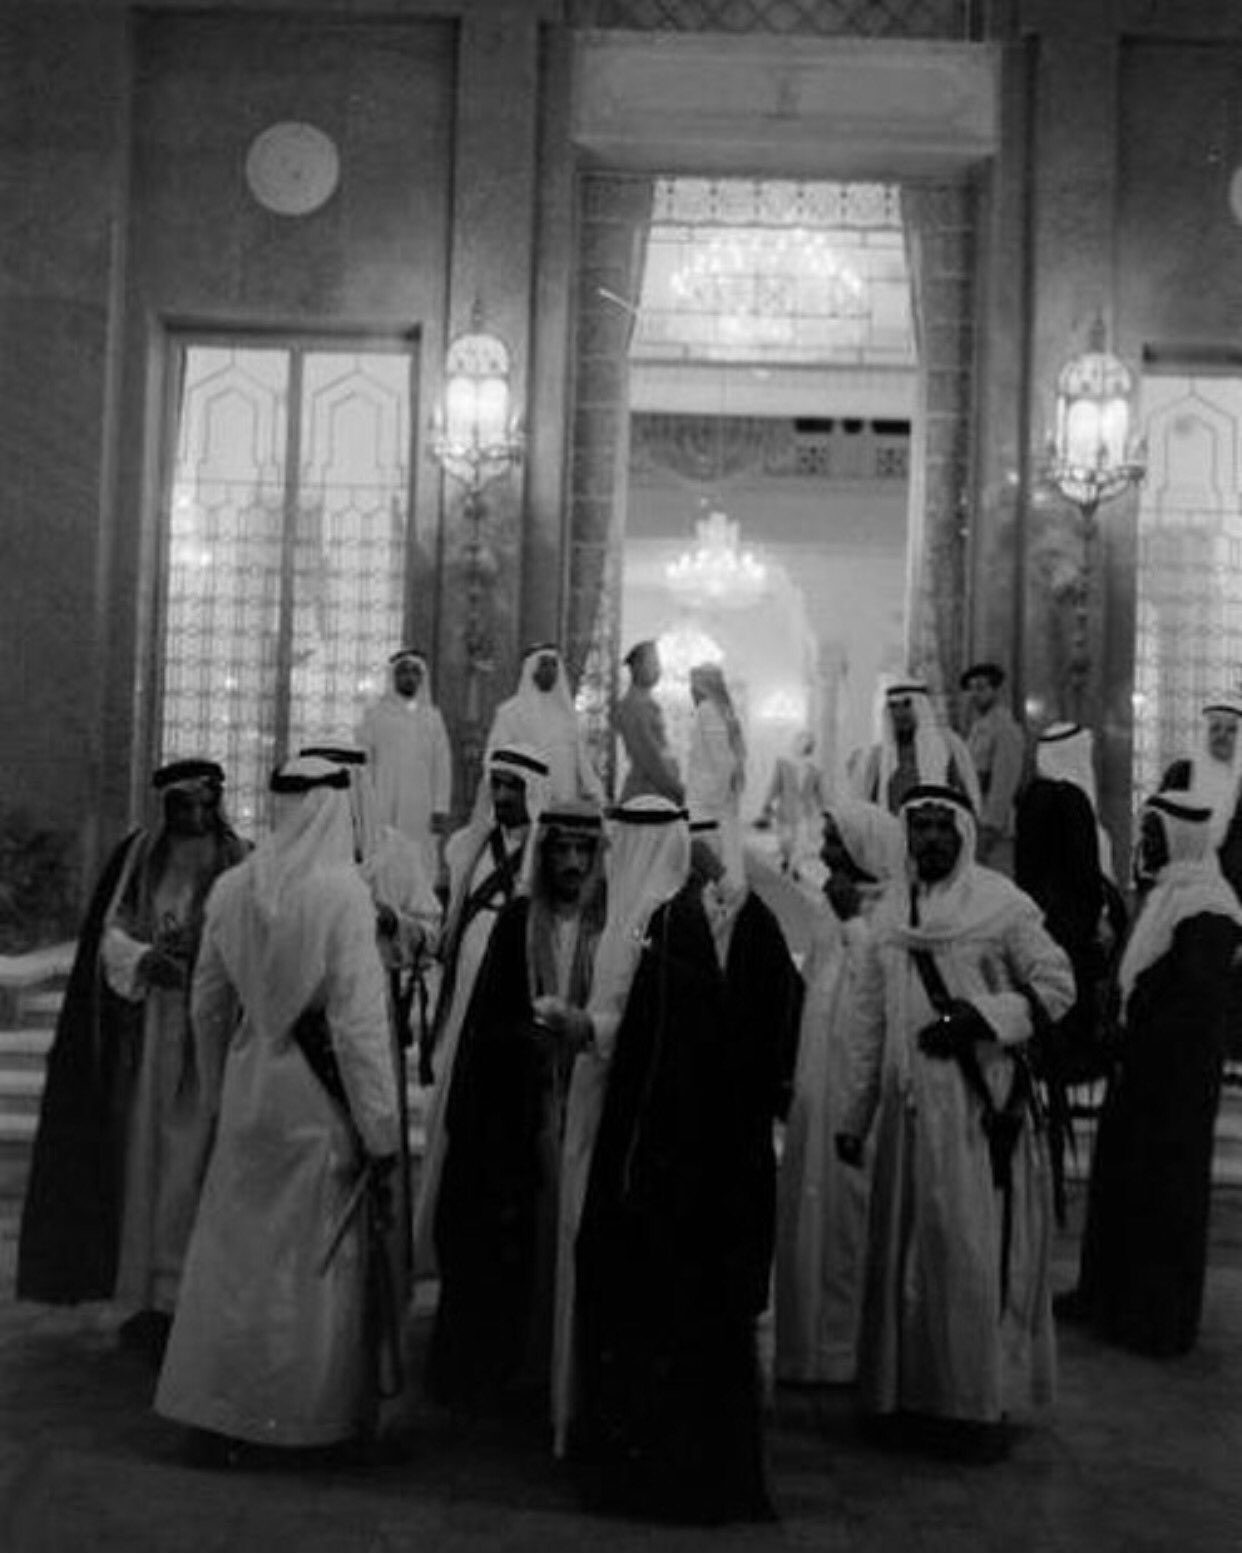 Royal Court during the Reign of King Saud